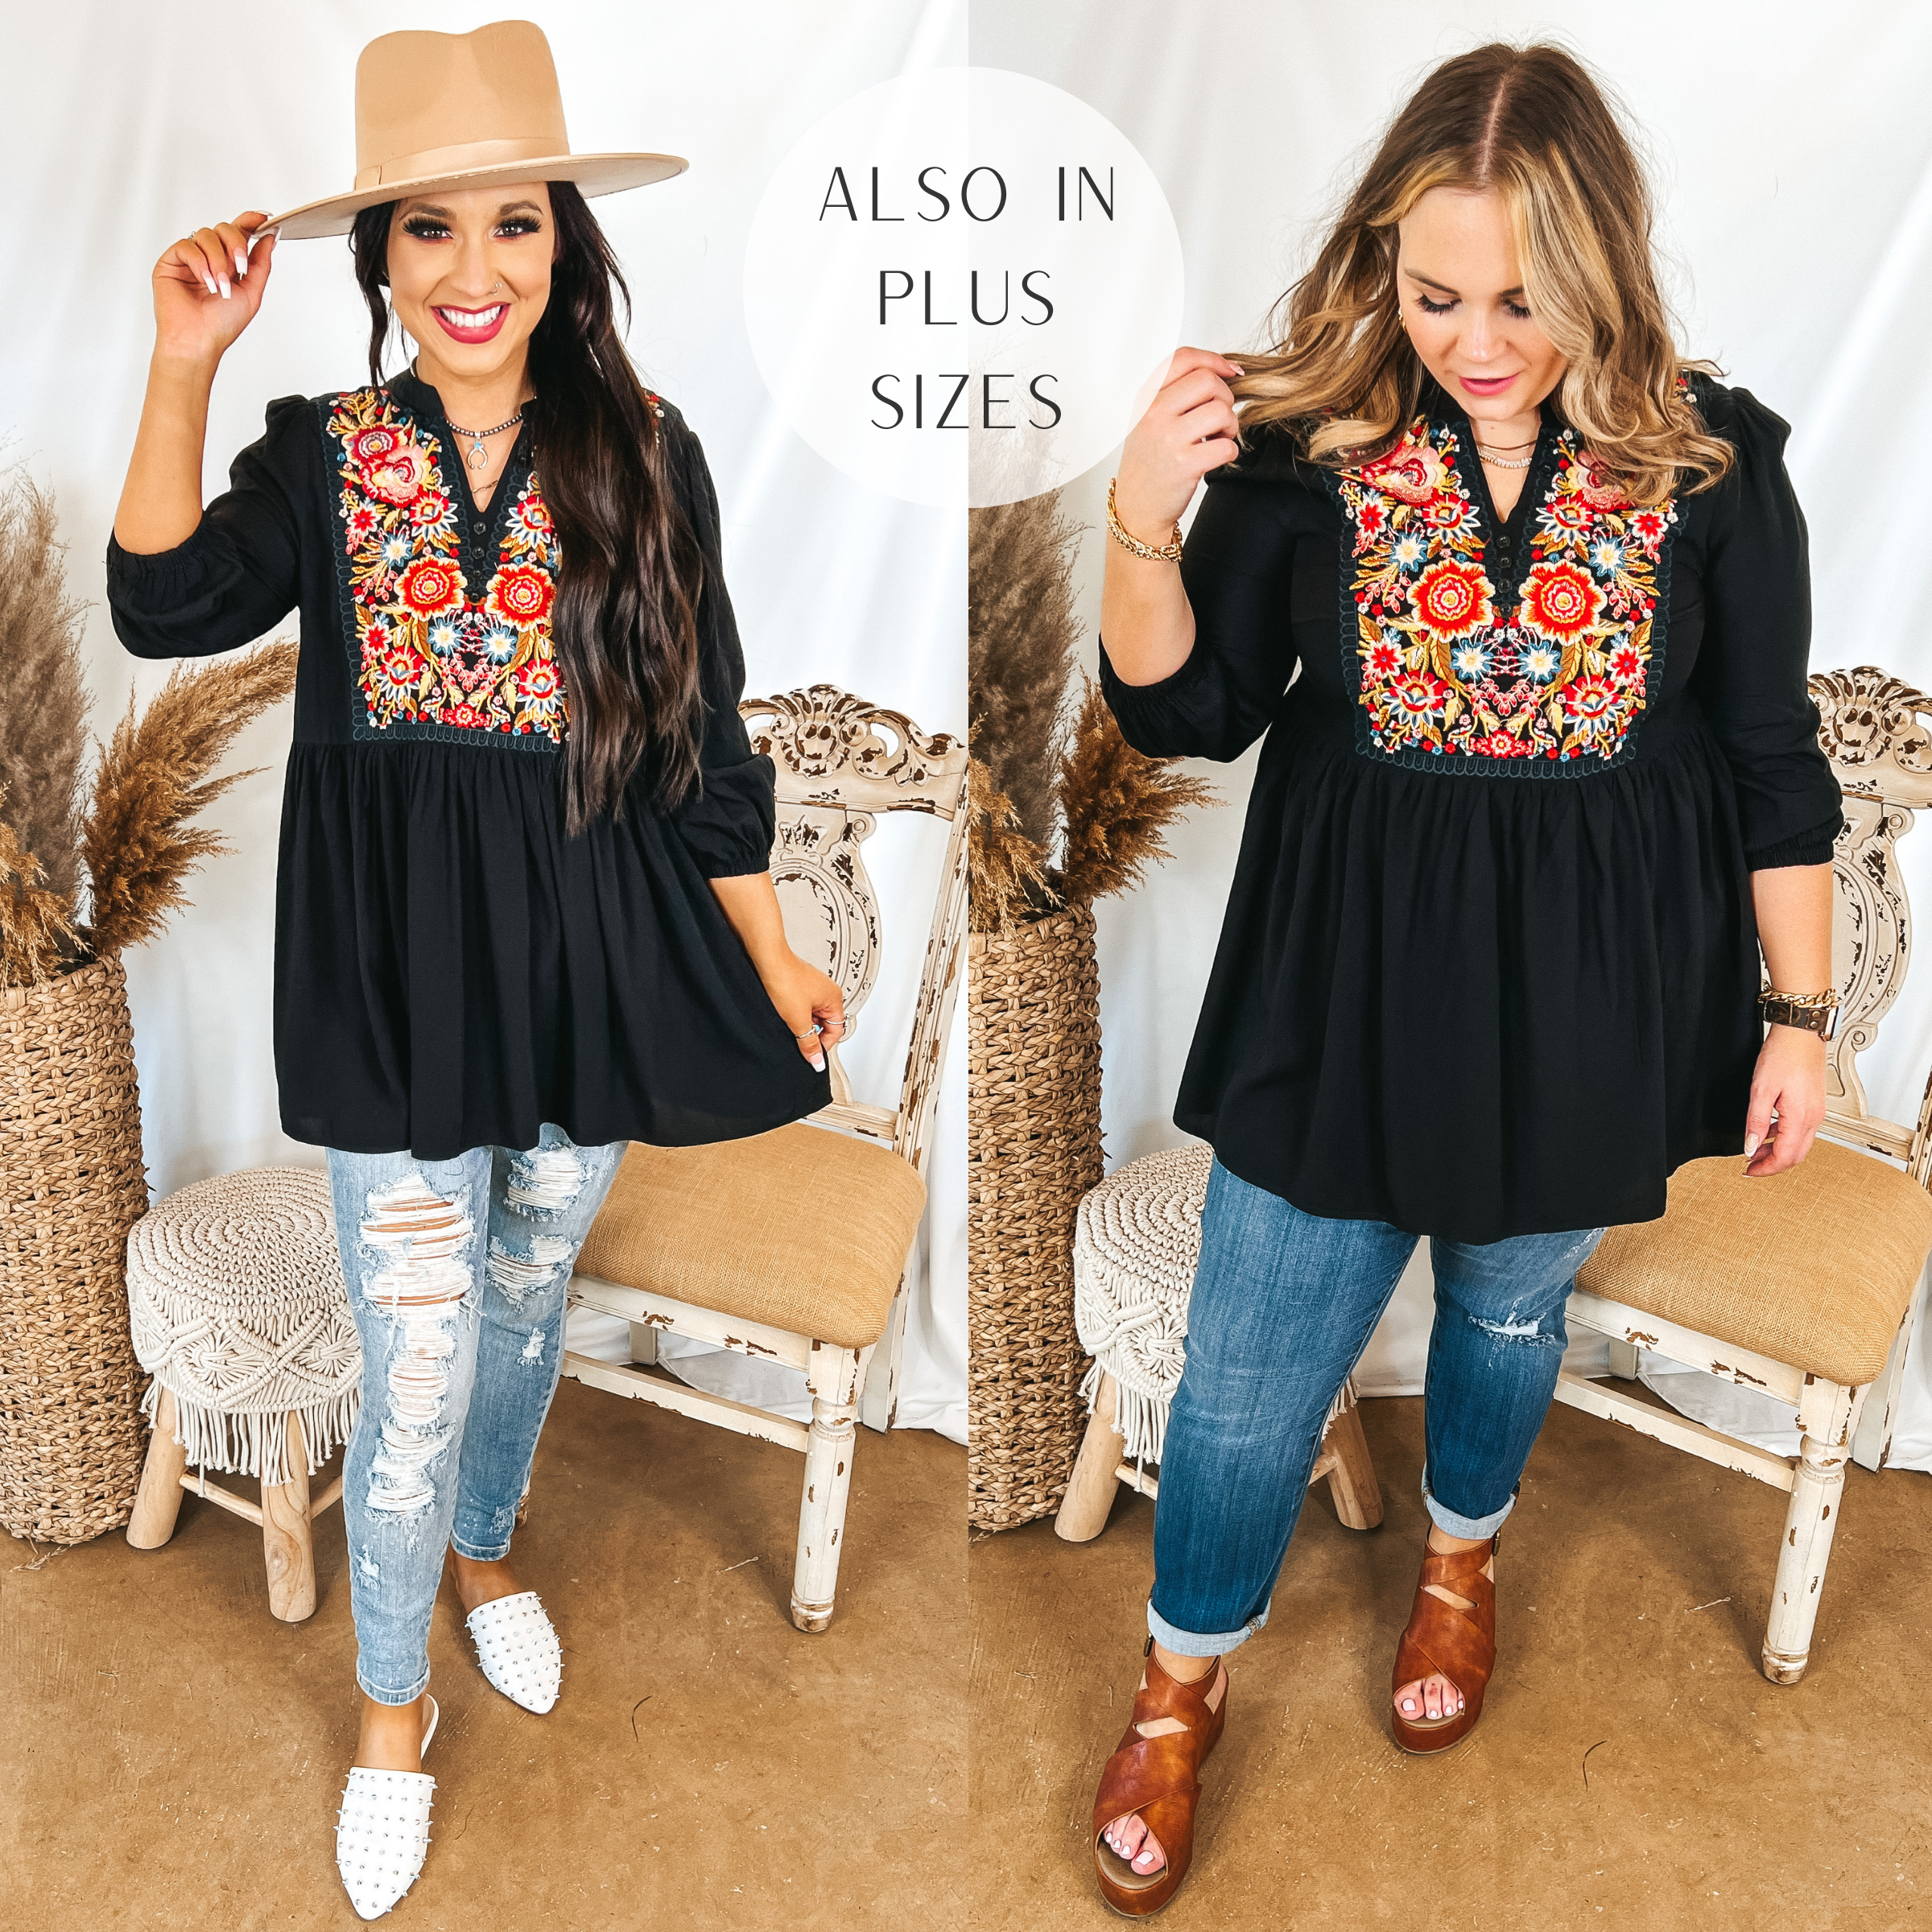 Models are wearing a black babydoll top with floral embroidery. Size small model has it paired with light wash distressed jeans, white mules, and a tan hat. Size large model has it paired with medium wash jeggings, tan wedges, and gold jewelry.